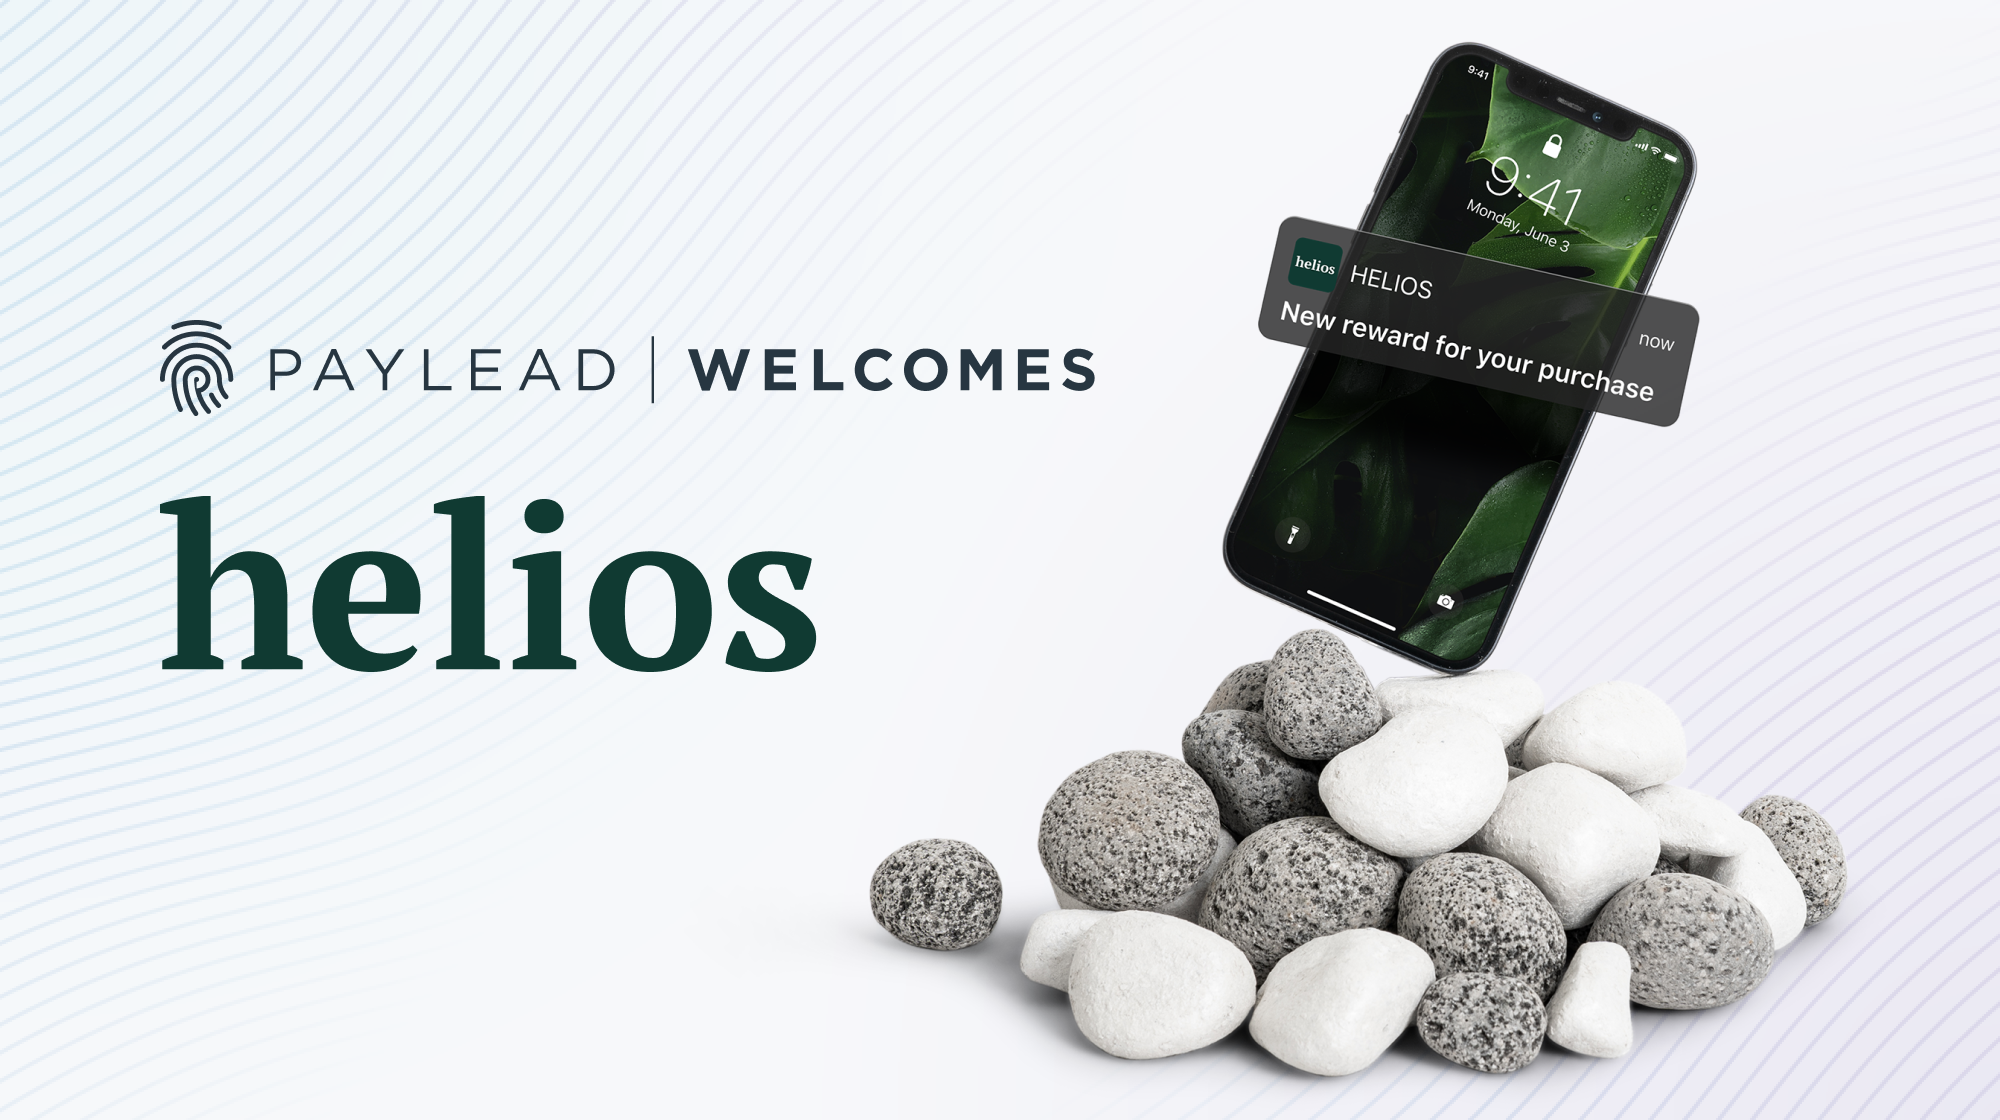 helios partners with PayLead to provide the leading automatic cashback experience